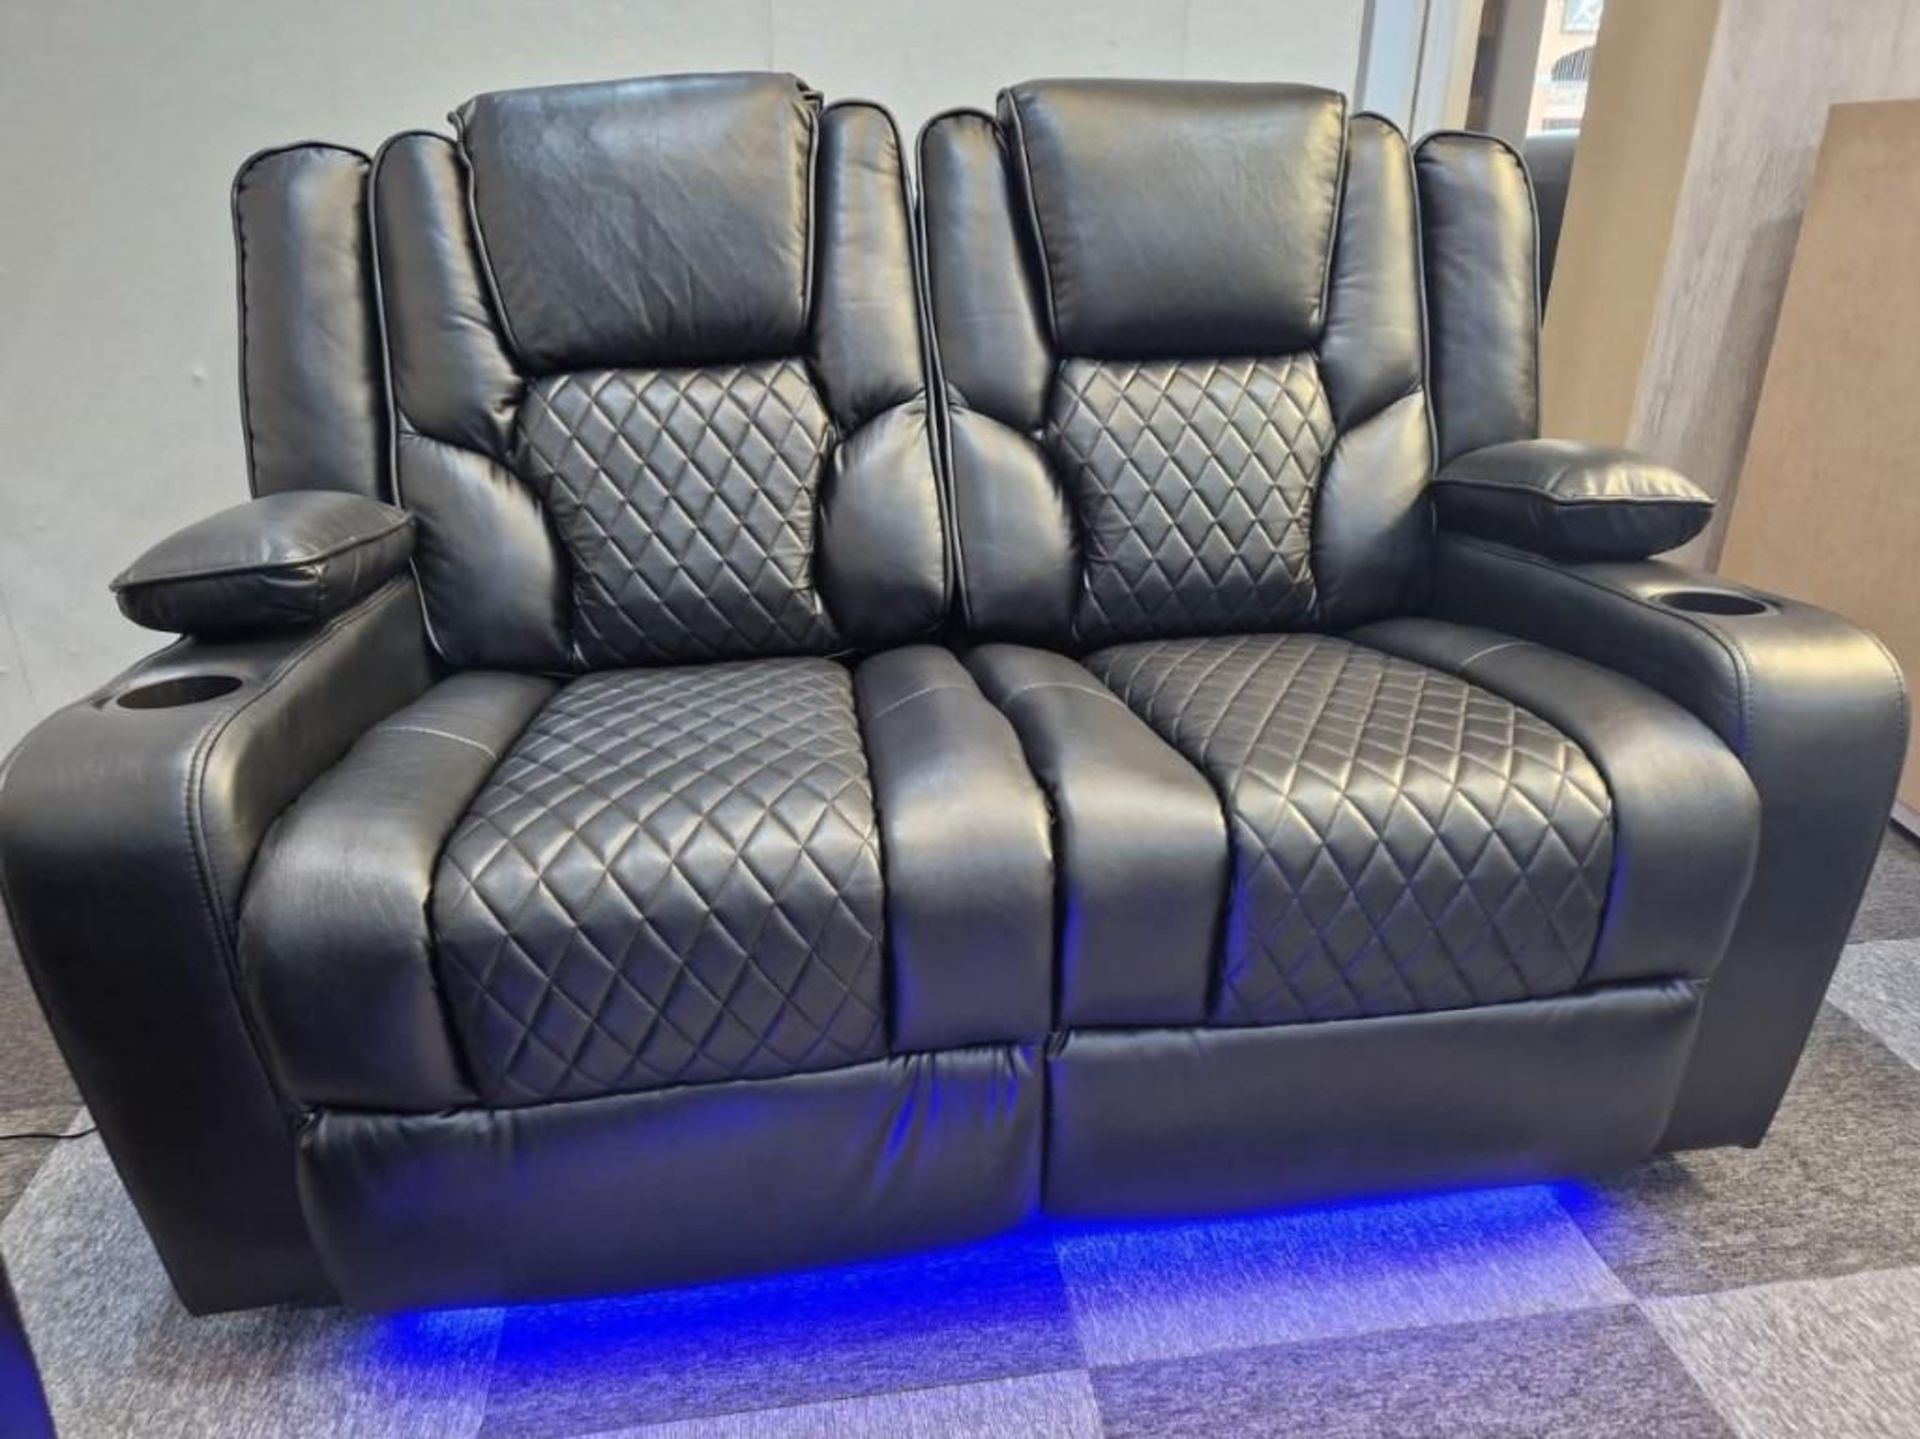 BRAND NEW Black Leather 2 Seater Electric Recliner With USB Charging Port and Floor lights. - Image 2 of 3